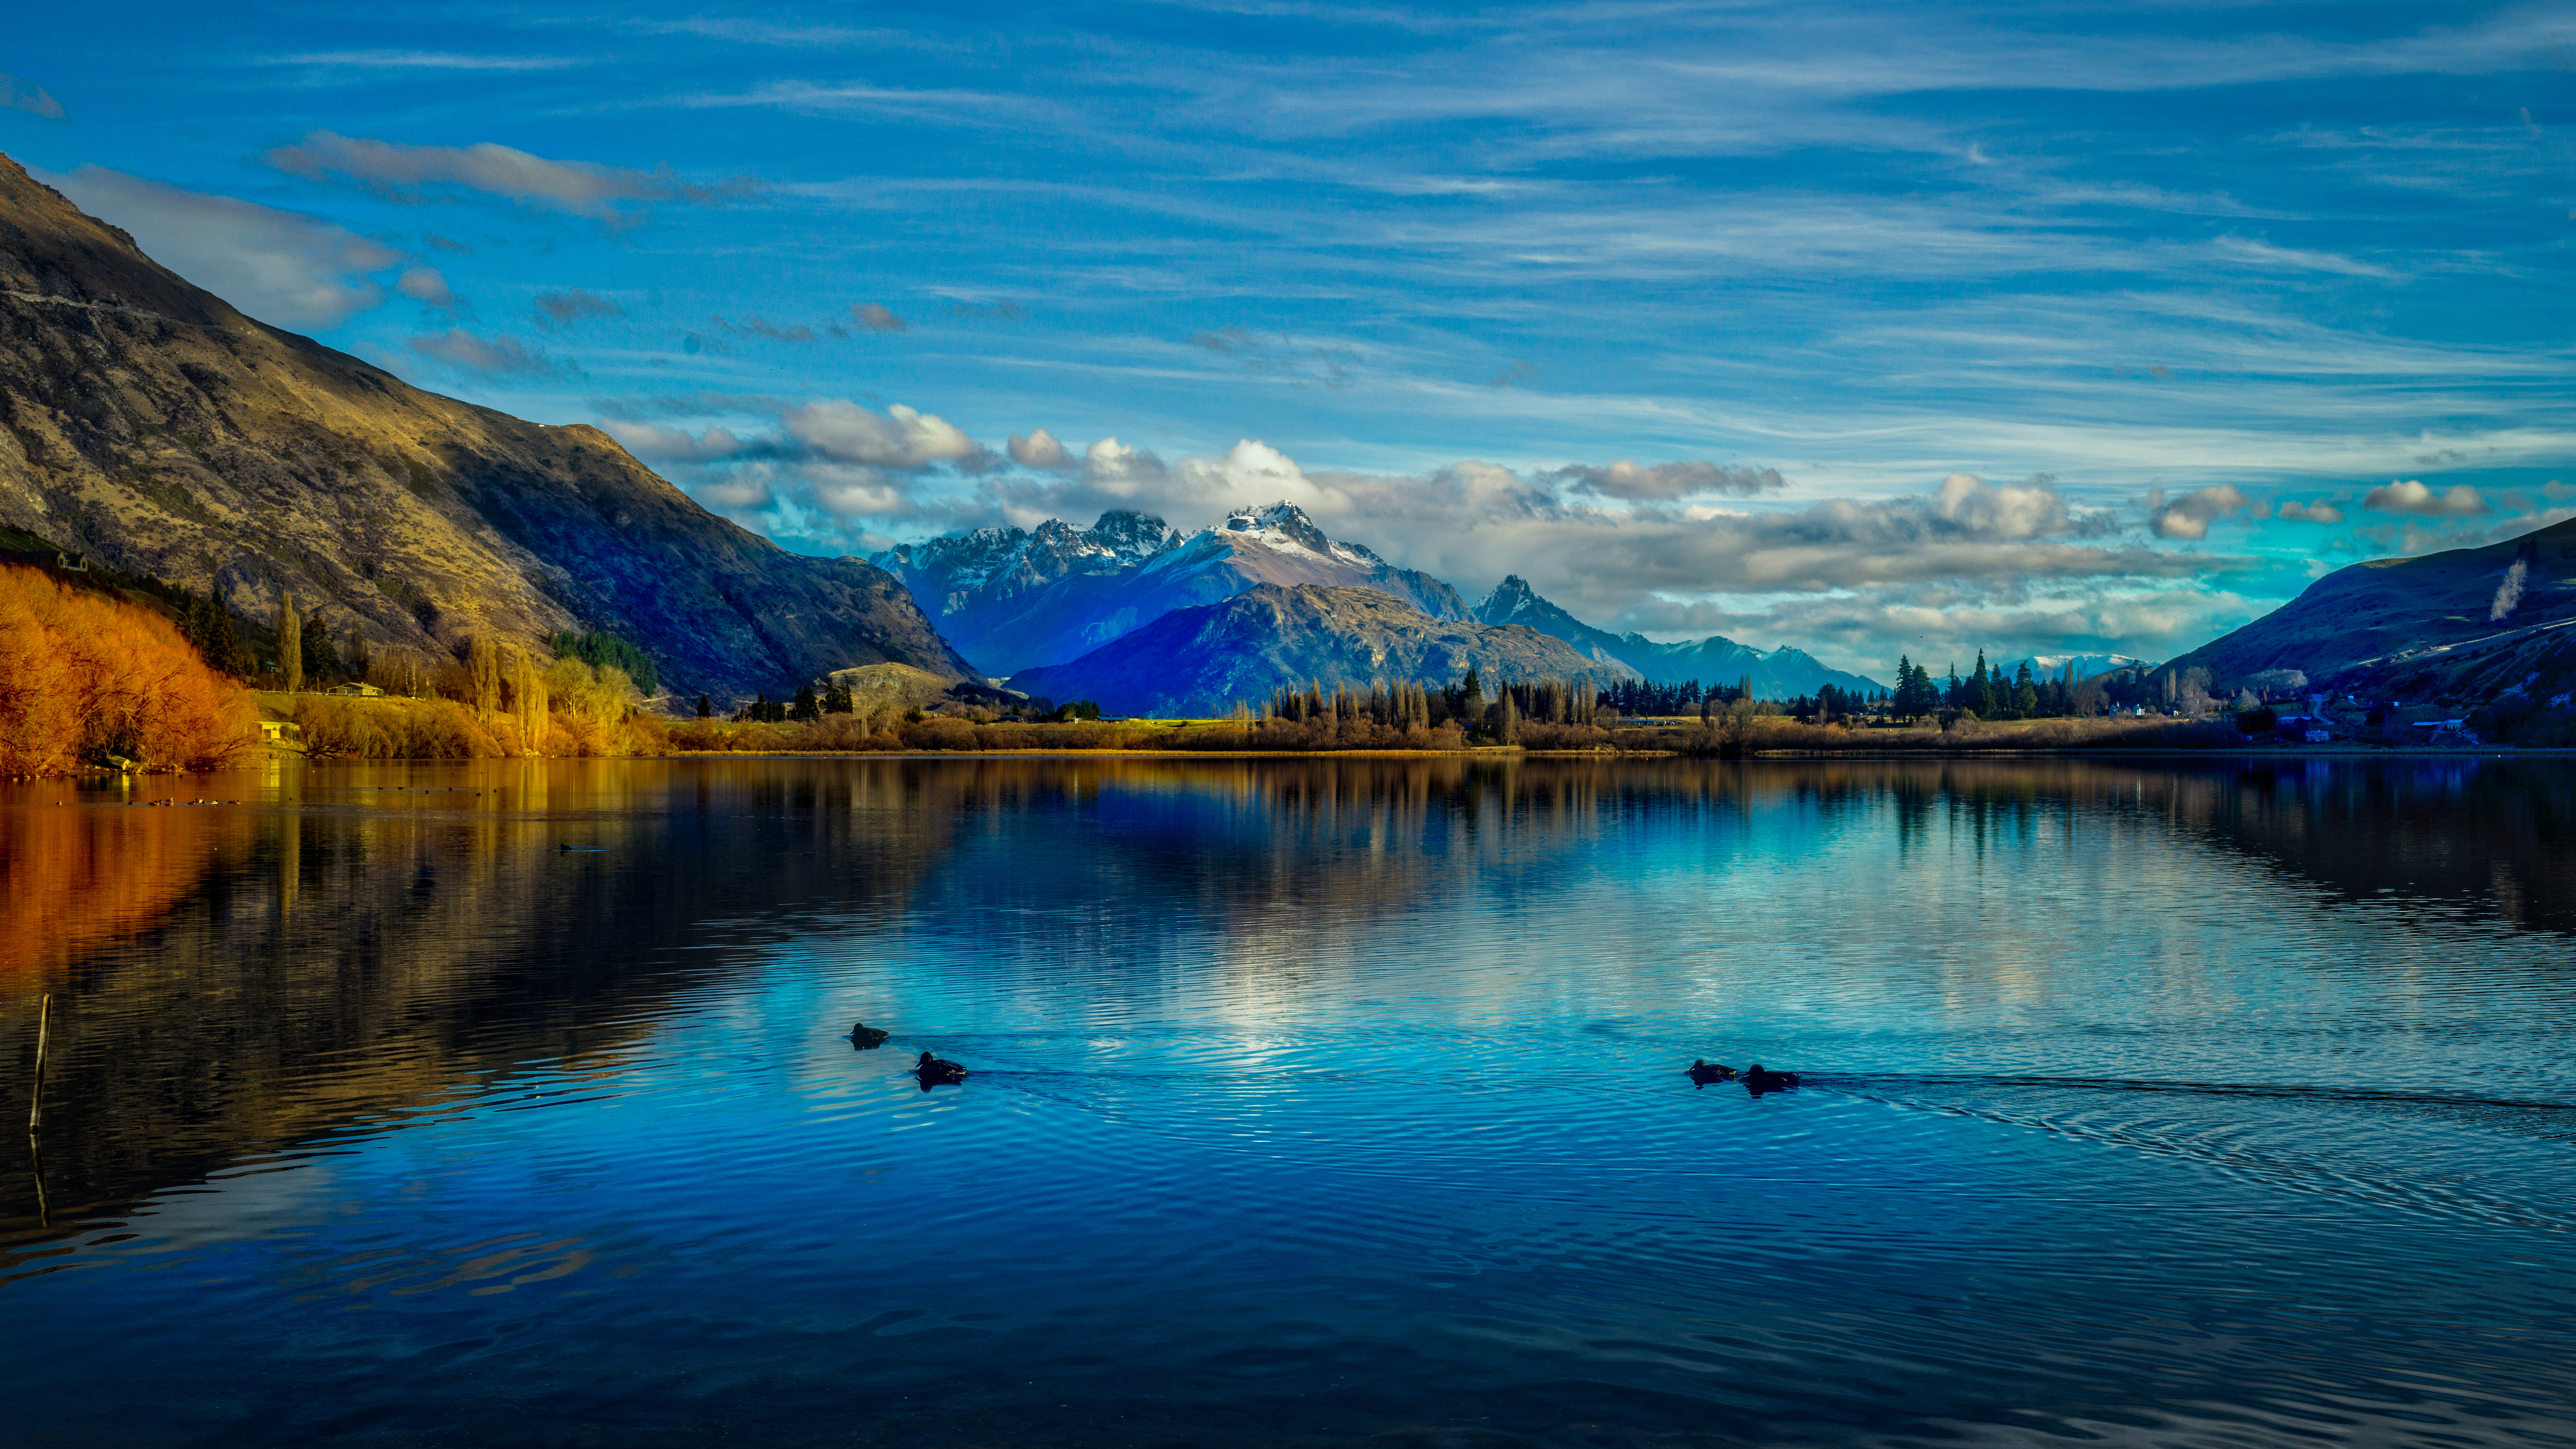 General 7680x4320 Trey Ratcliff photography water reflection mountains clouds New Zealand nature